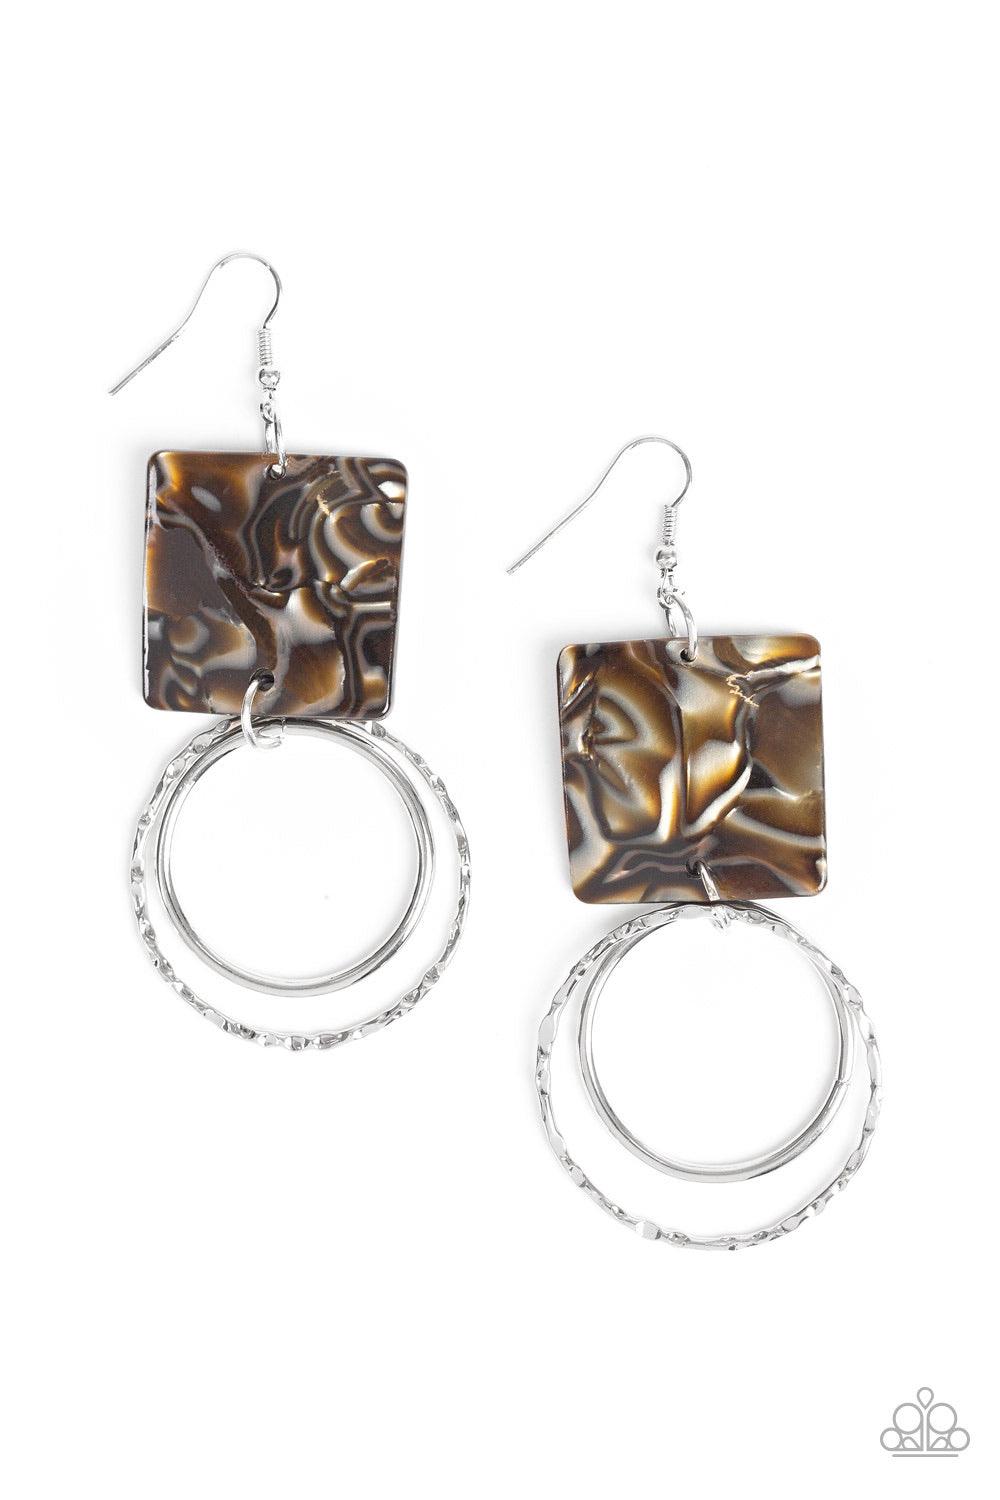 Paparazzi Accessories Maven Maker - Brown One smooth and one hammered silver hoop swing from the bottom of a square acrylic frame, creating a colorfully retro lure. Earring attaches to a standard fishhook fitting. Jewelry